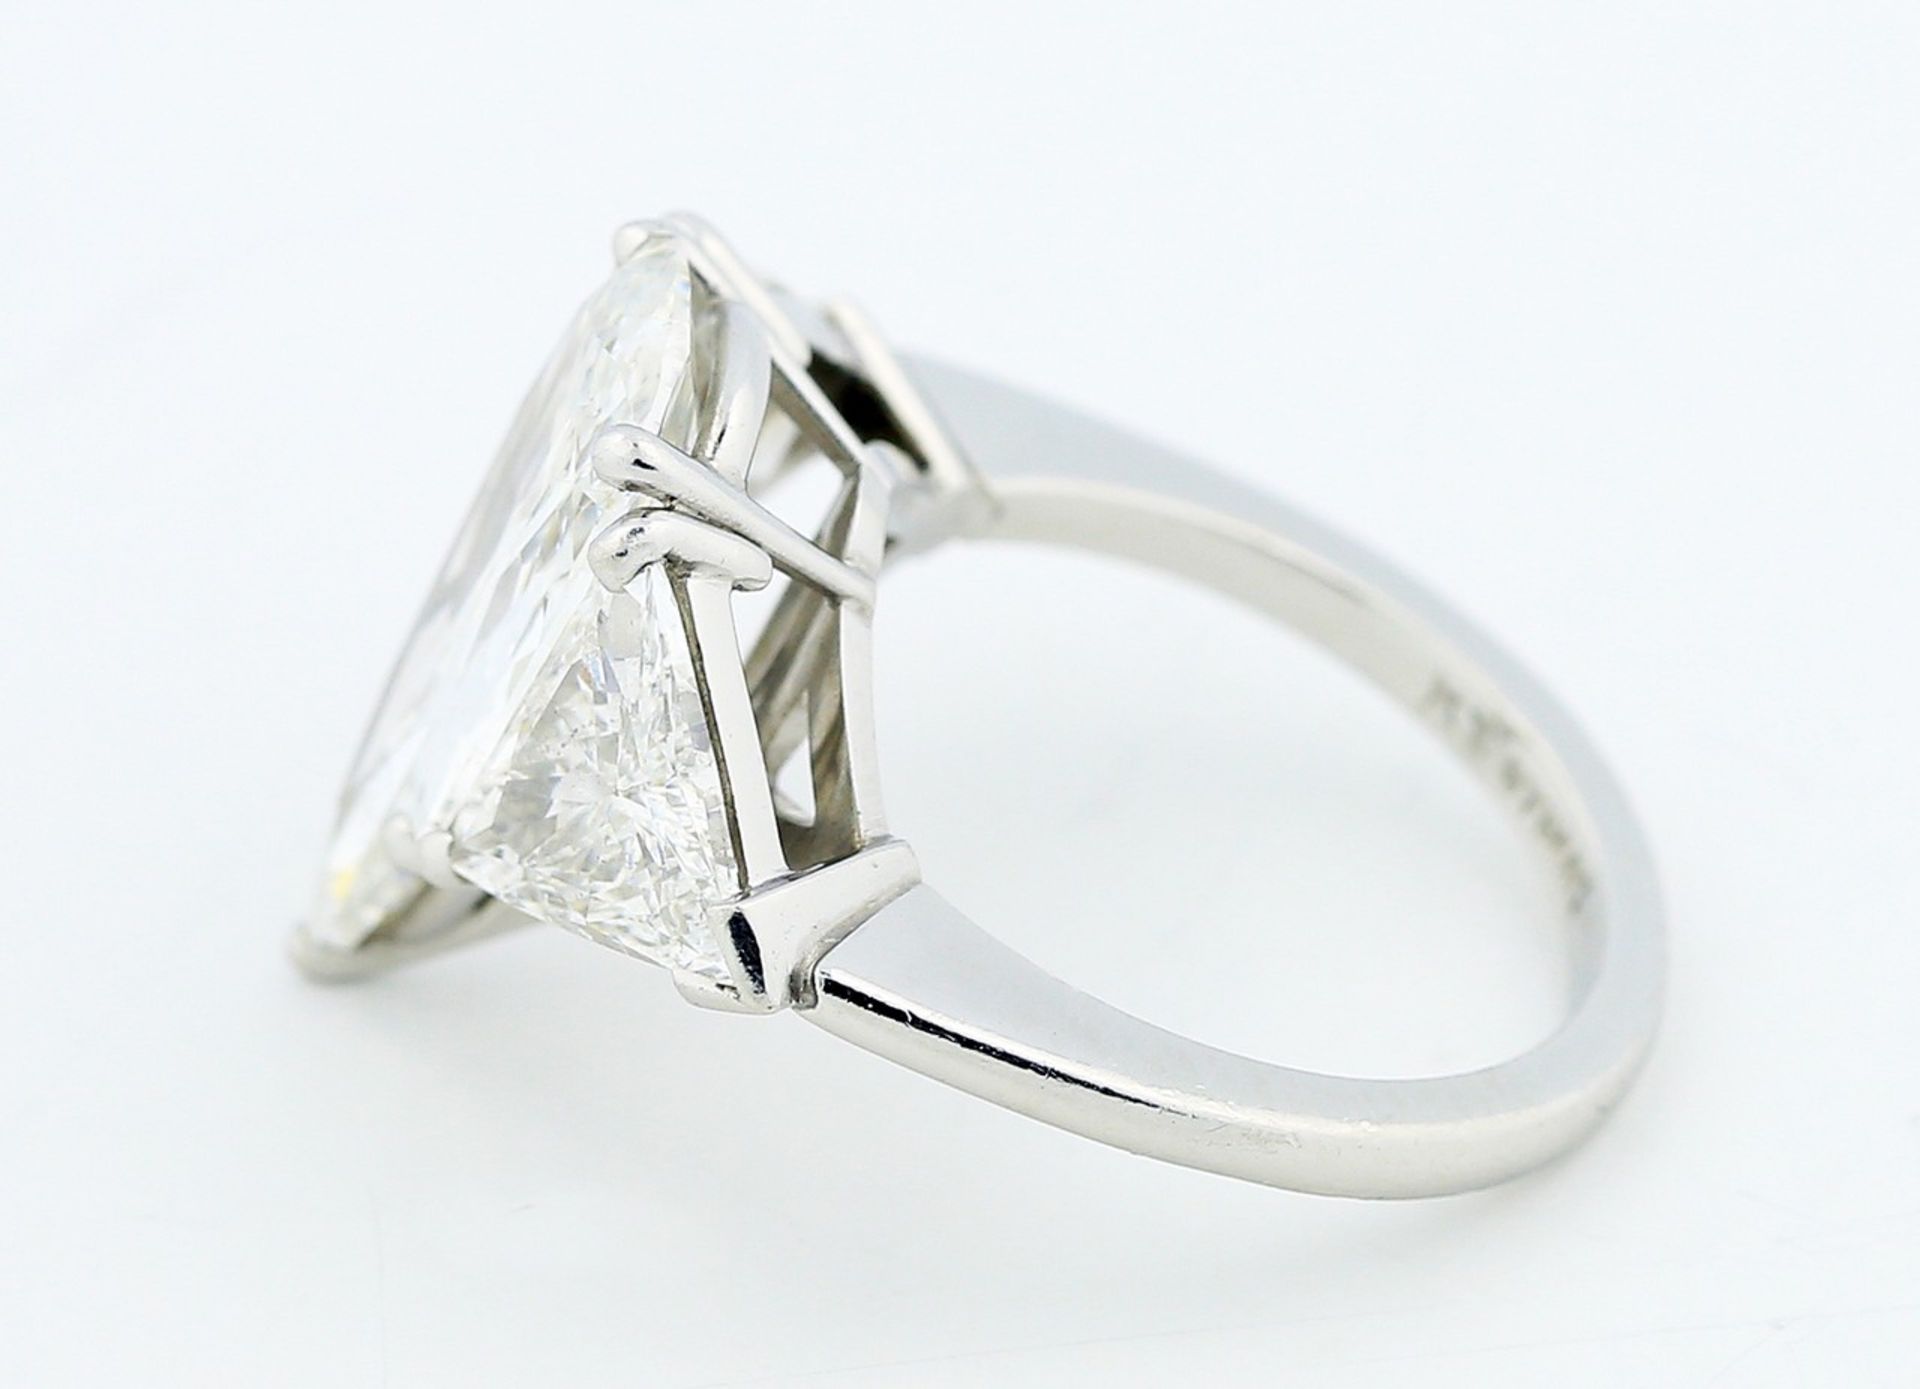 4.01 CARAT DIAMOND PLATINUM RING Centered by a pear-shaped diamond weighing 4.01 carats, flanked - Image 4 of 4